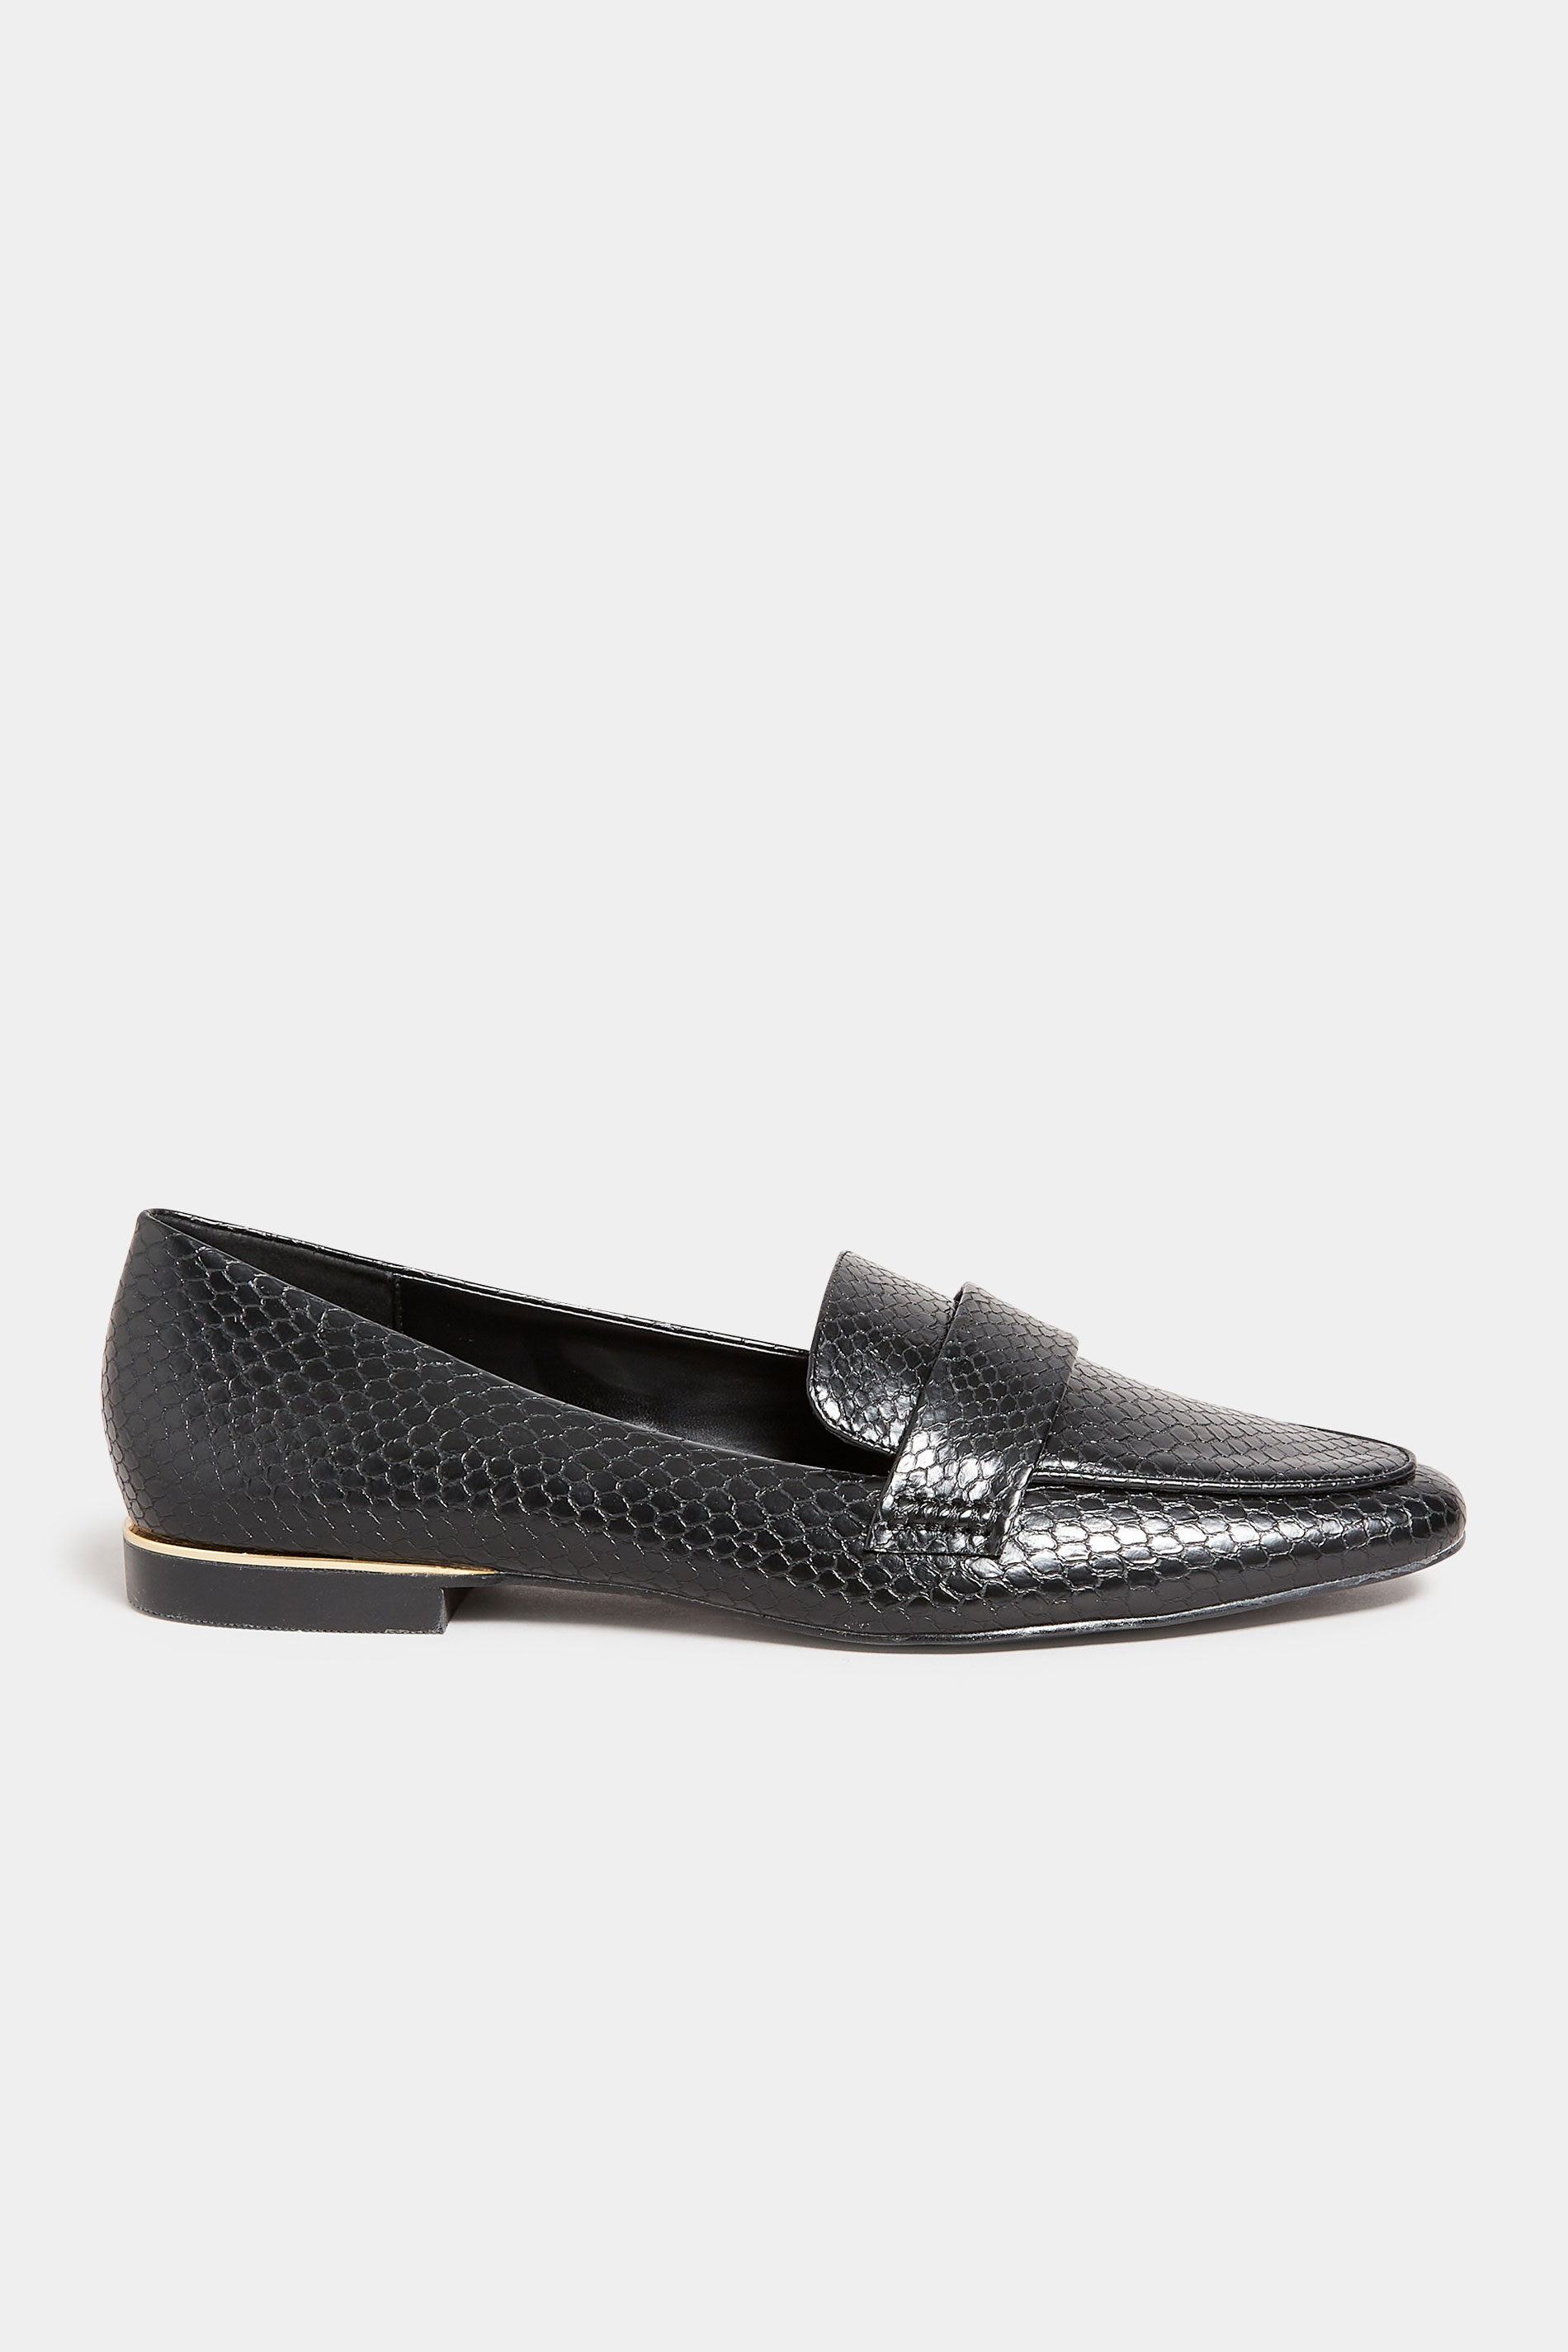 LTS Black Metal Trim Loafers In Standard Fit | Long Tall Sally 3